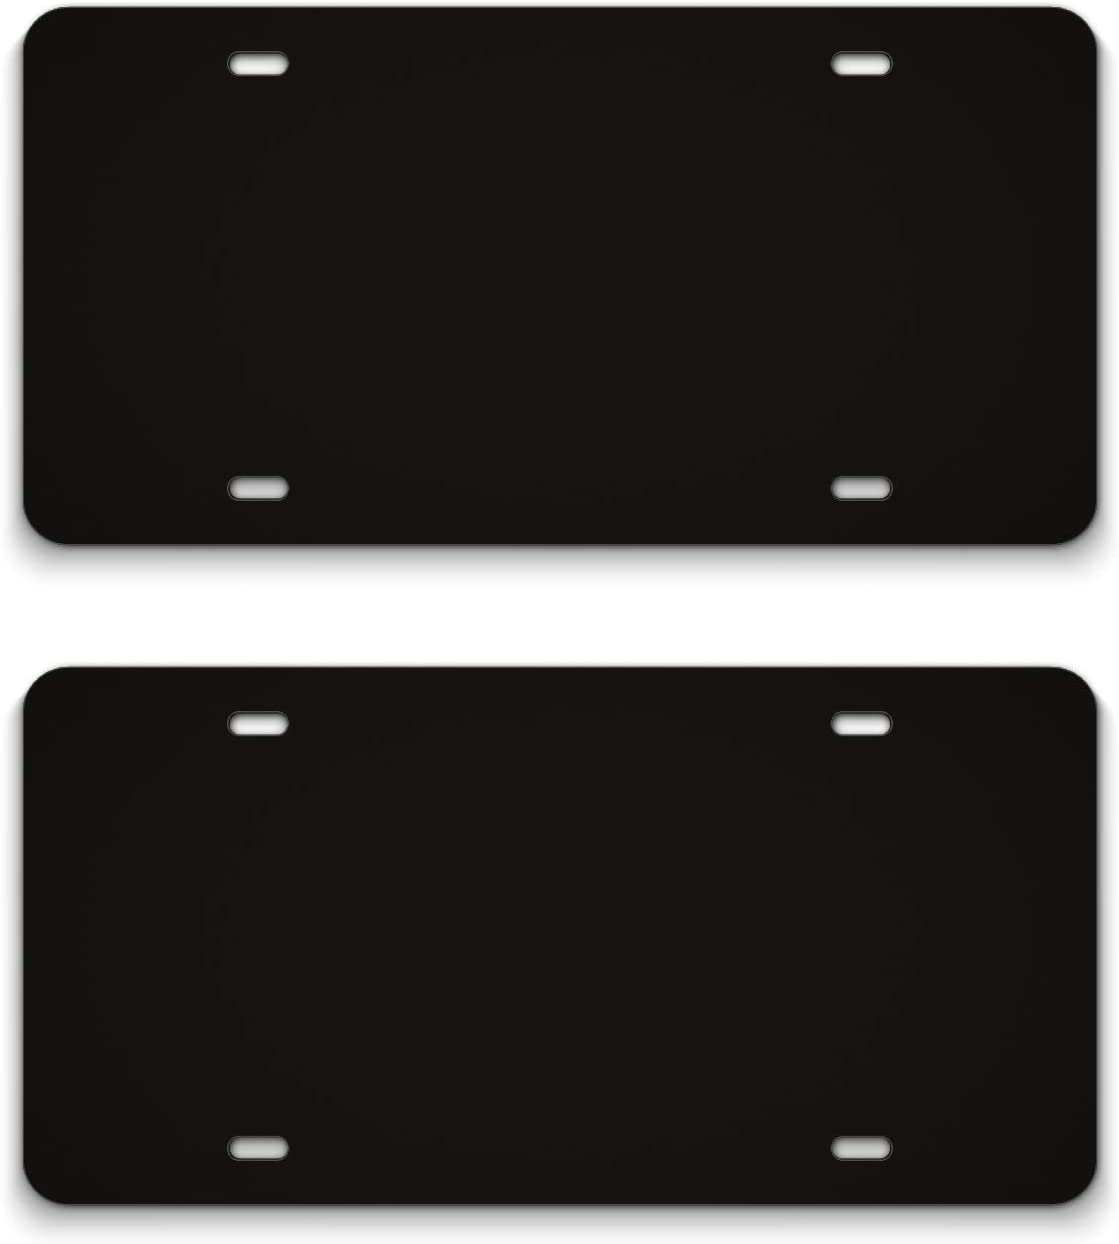 Blank License Plate and  Blank License Plate Frames ready for personalization.